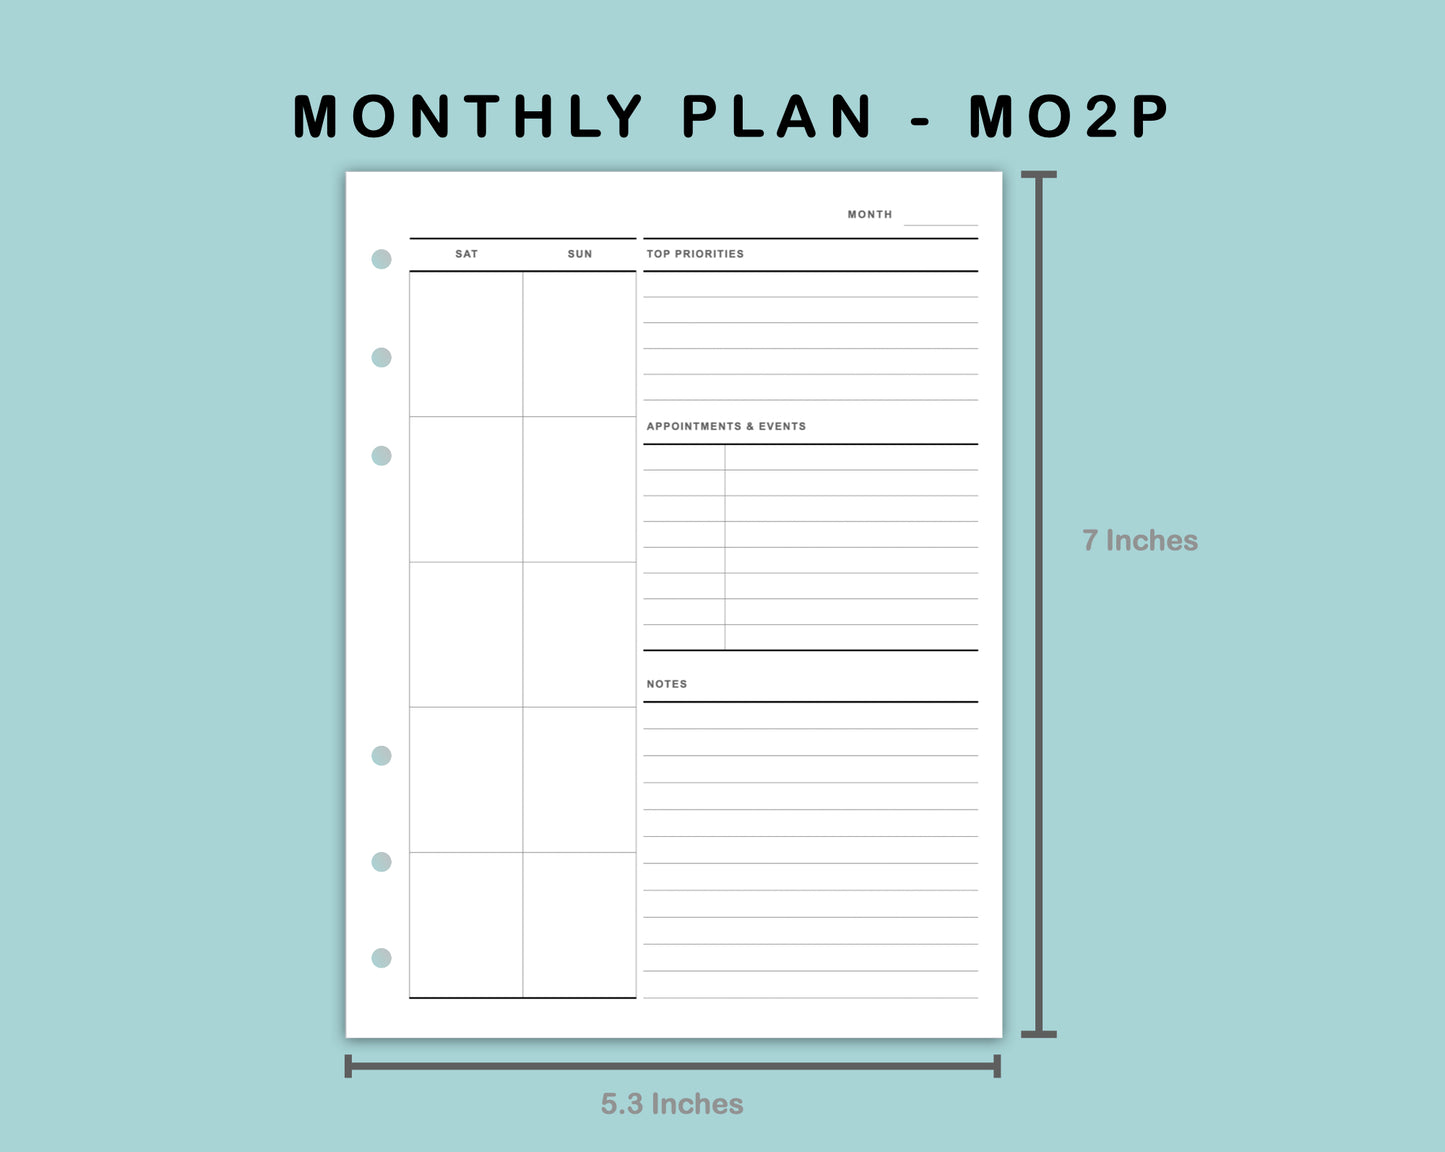 B6 Wide Inserts - Monthly Plan - MO2P - with Top Priority